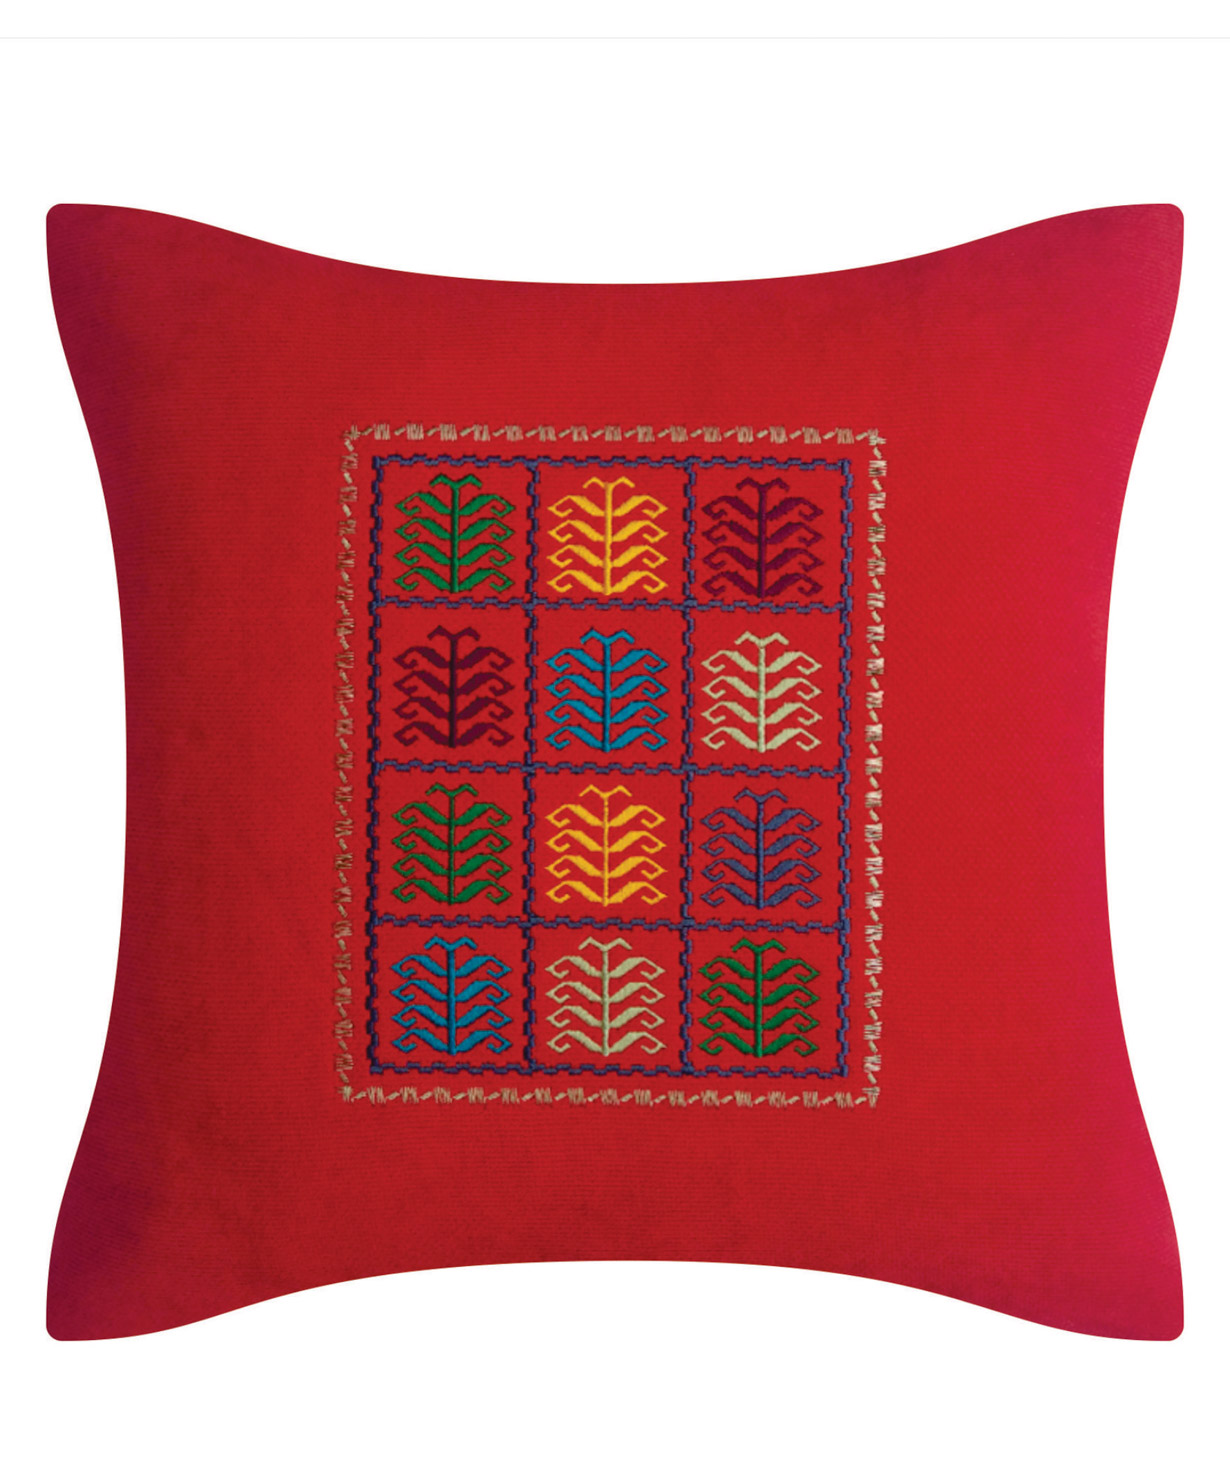 Pillow `Miskaryan heritage` embroidered with Armenian ornament №34